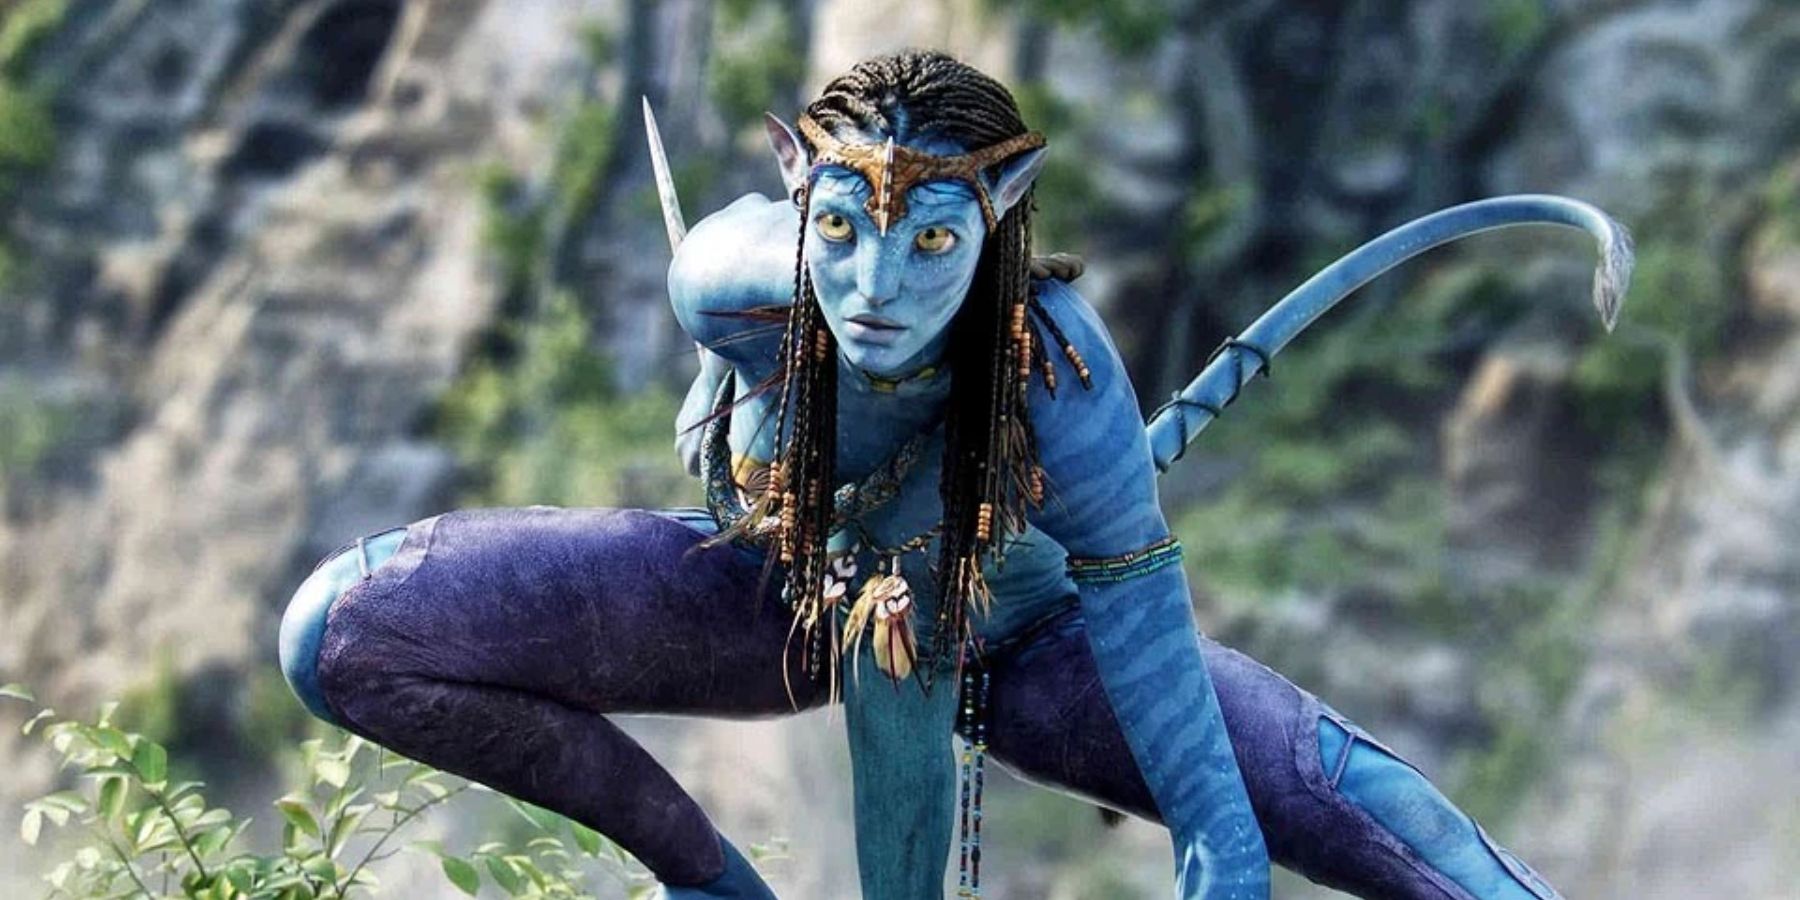 The Avatar Sequels Need More Compelling Stories